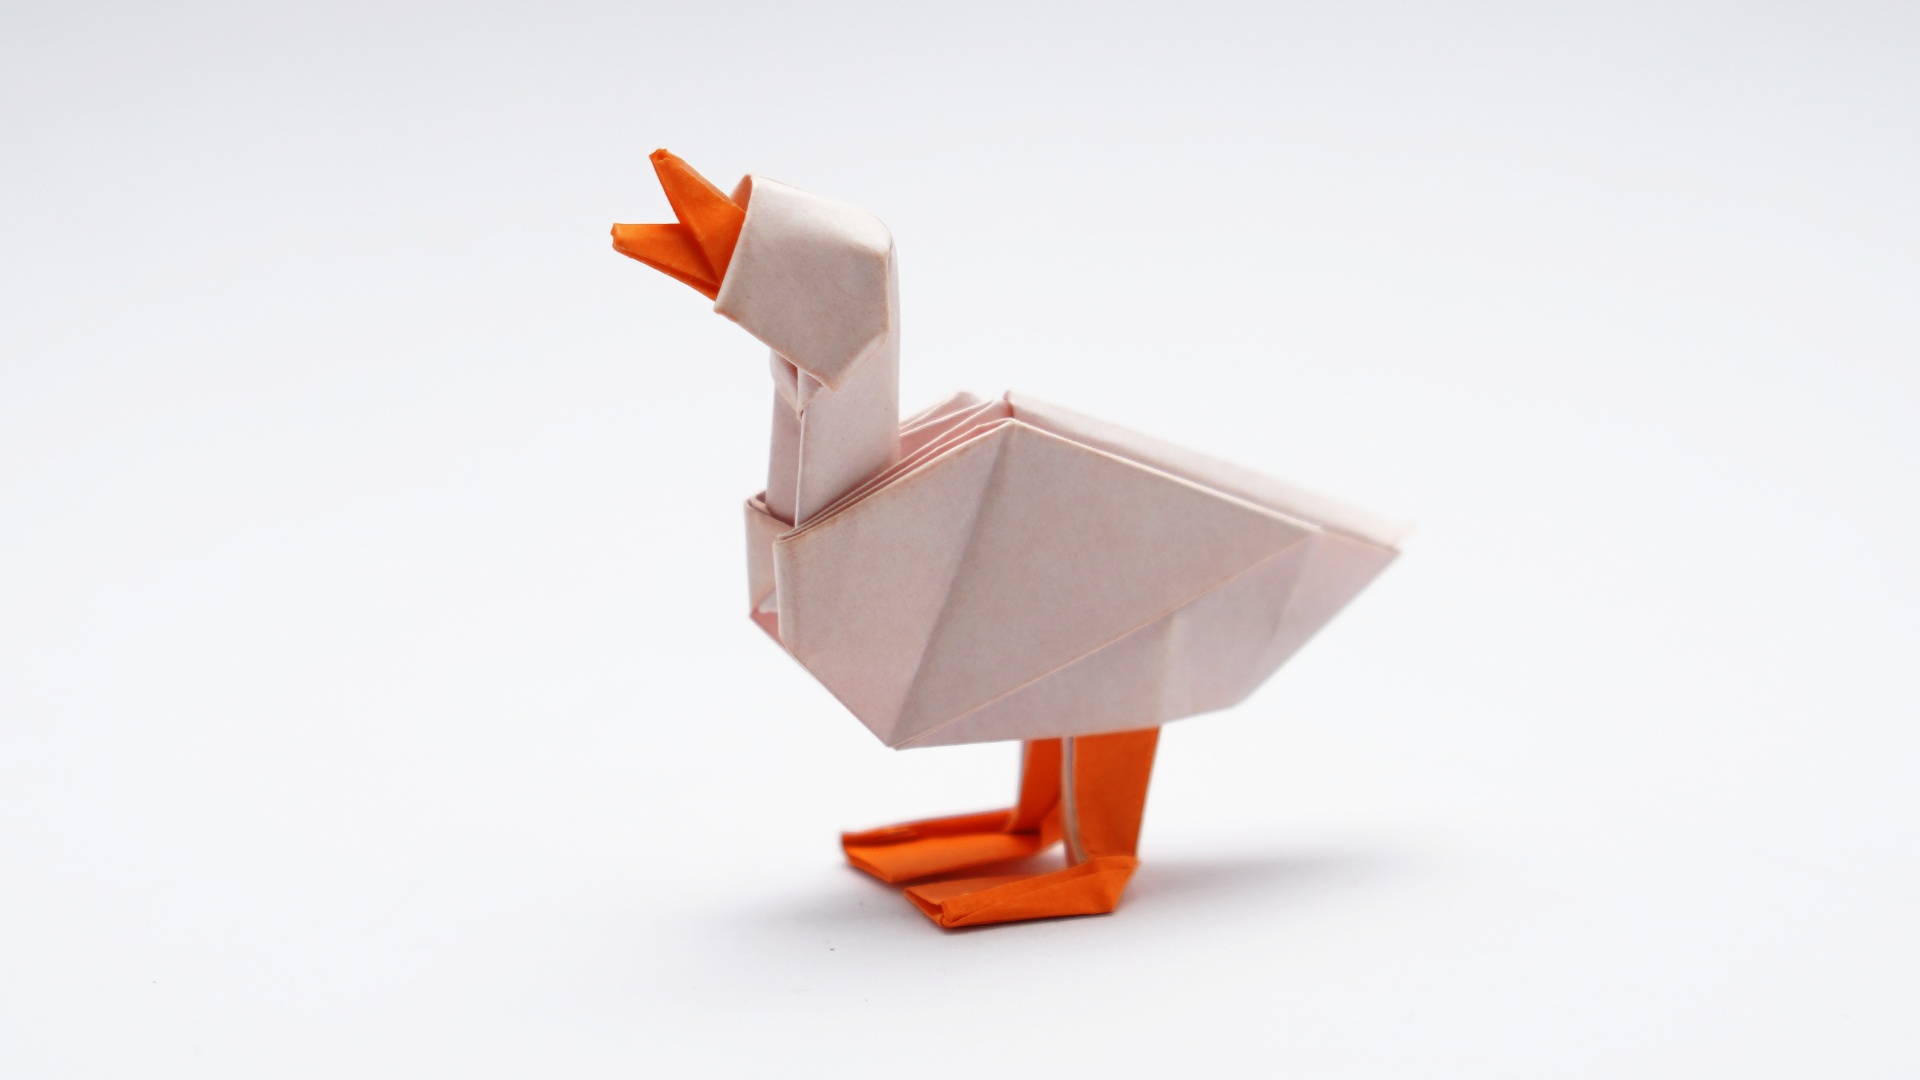 Moving paper toys - How to make a paper duck 